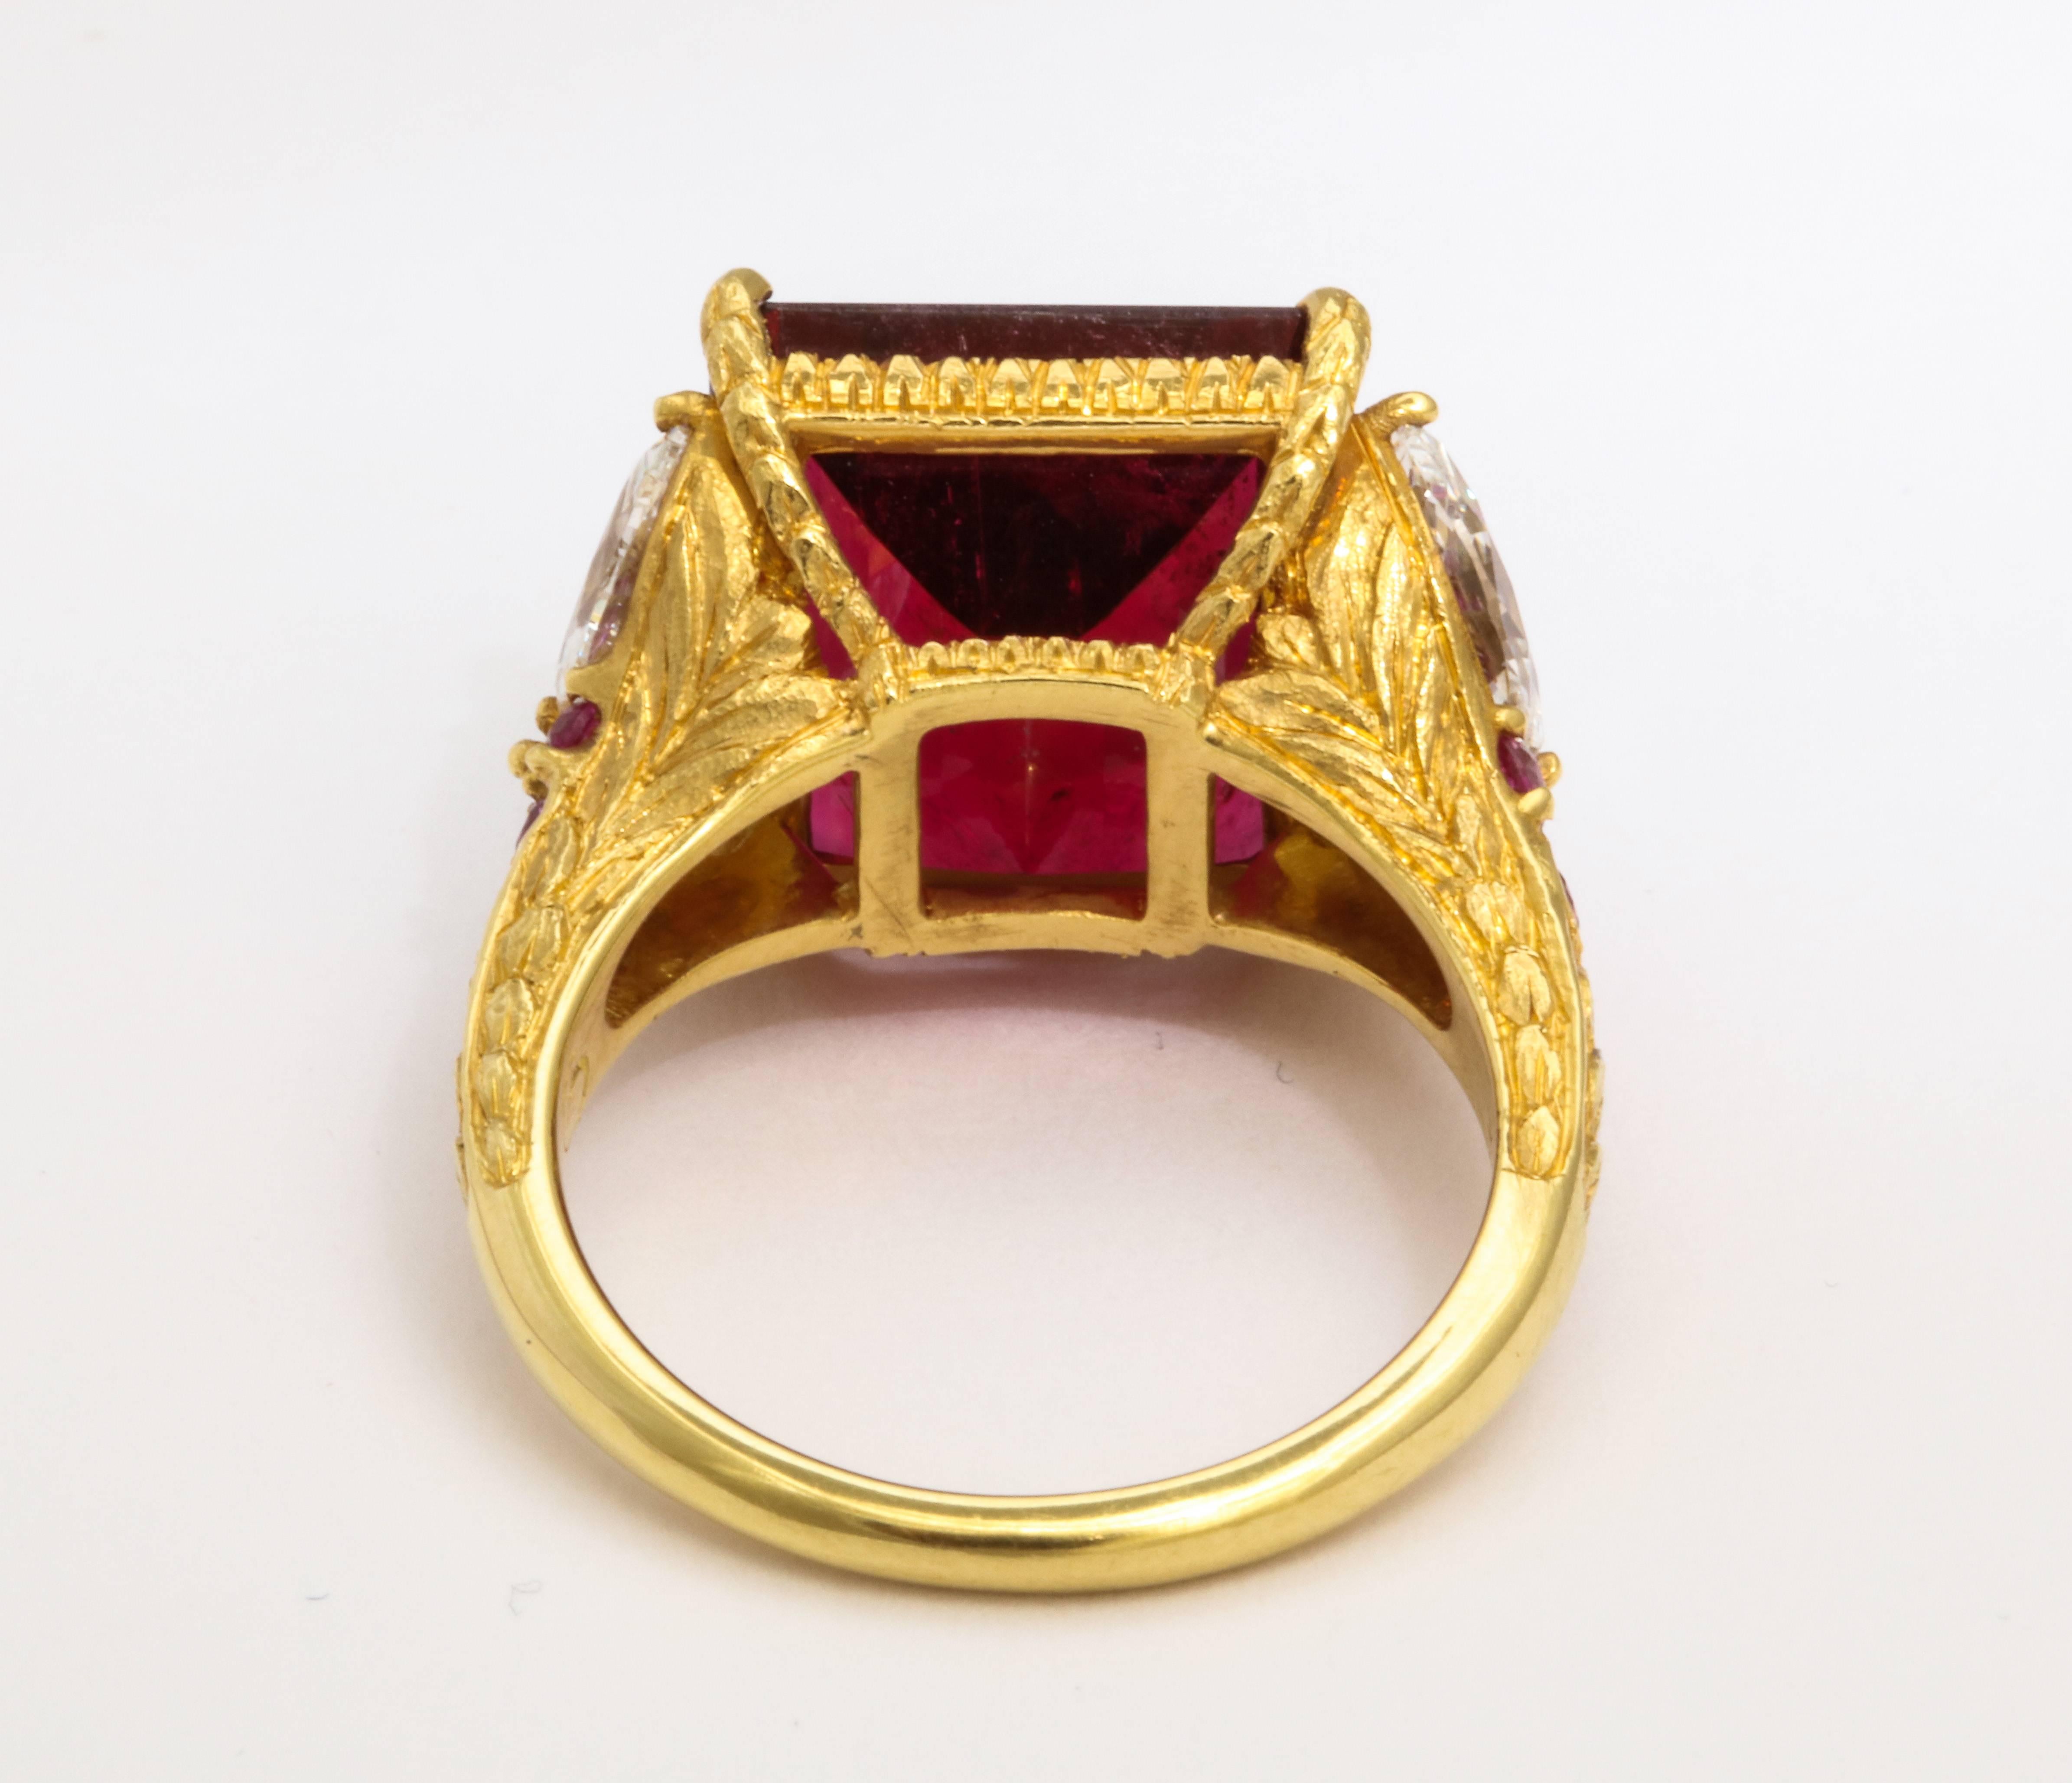 We can't believe this ring is still available! A remarkable value for this unique and sophisticated red stunner! A one of a kind cocktail ring featuring an exceptionally clean, rare emerald-cut rubellite of the purest red color, weighing 10.12